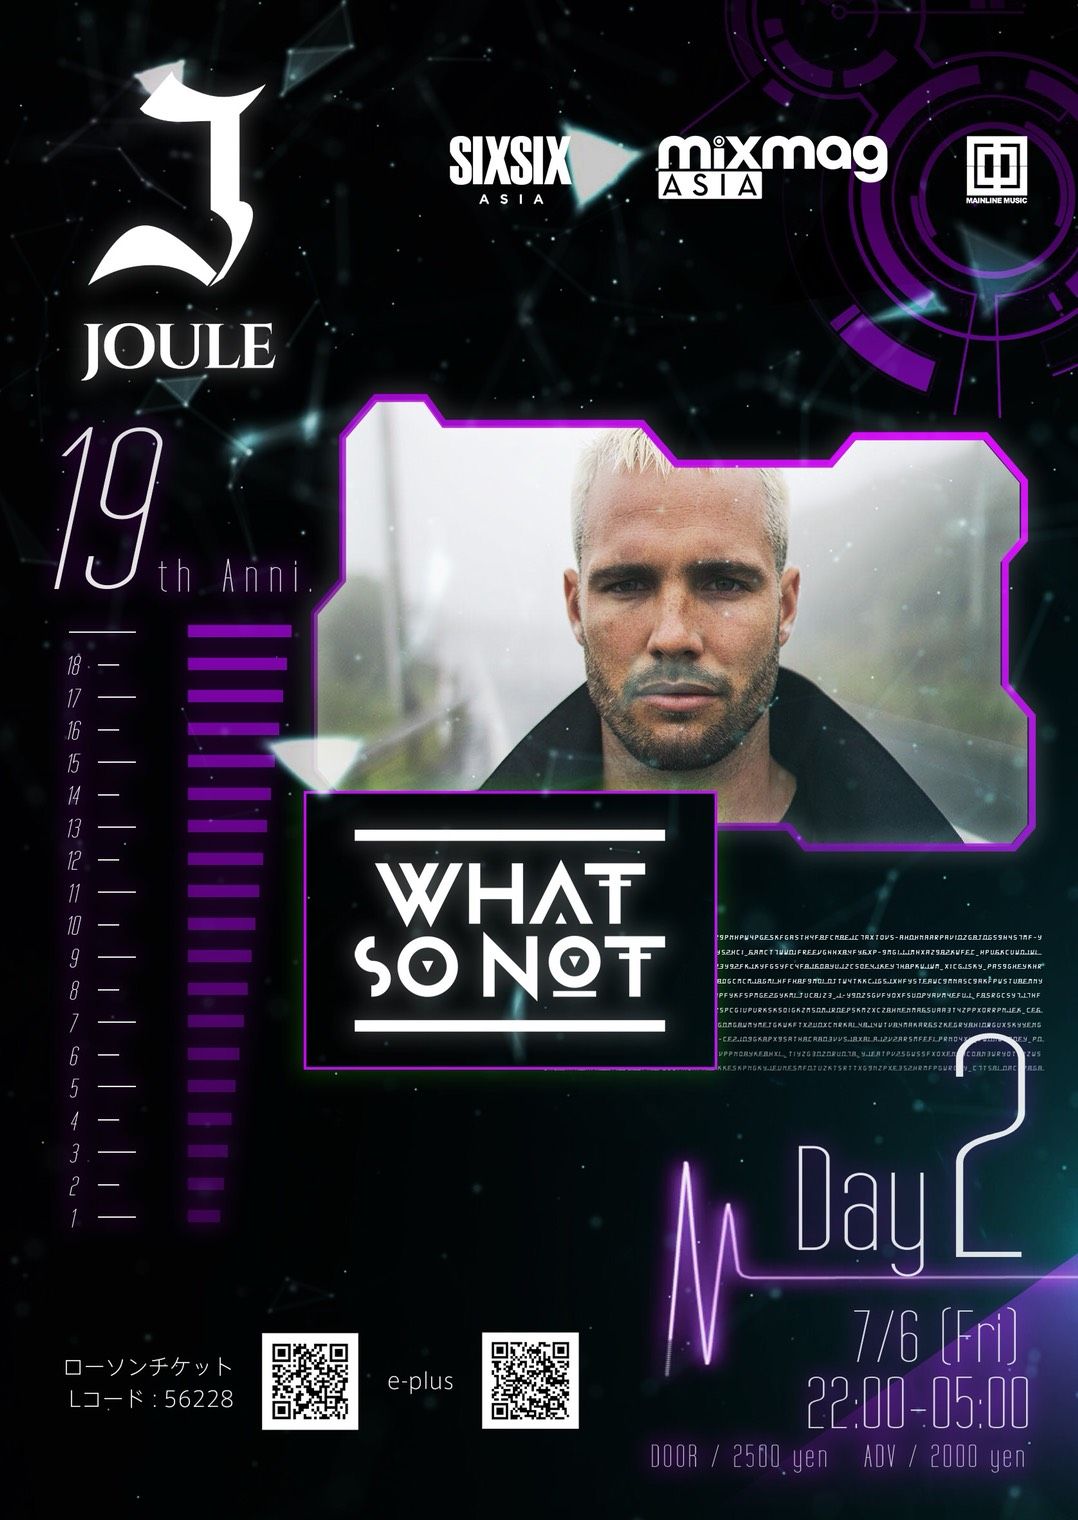 Joule 19th Anniversary feat. WHAT SO NOT